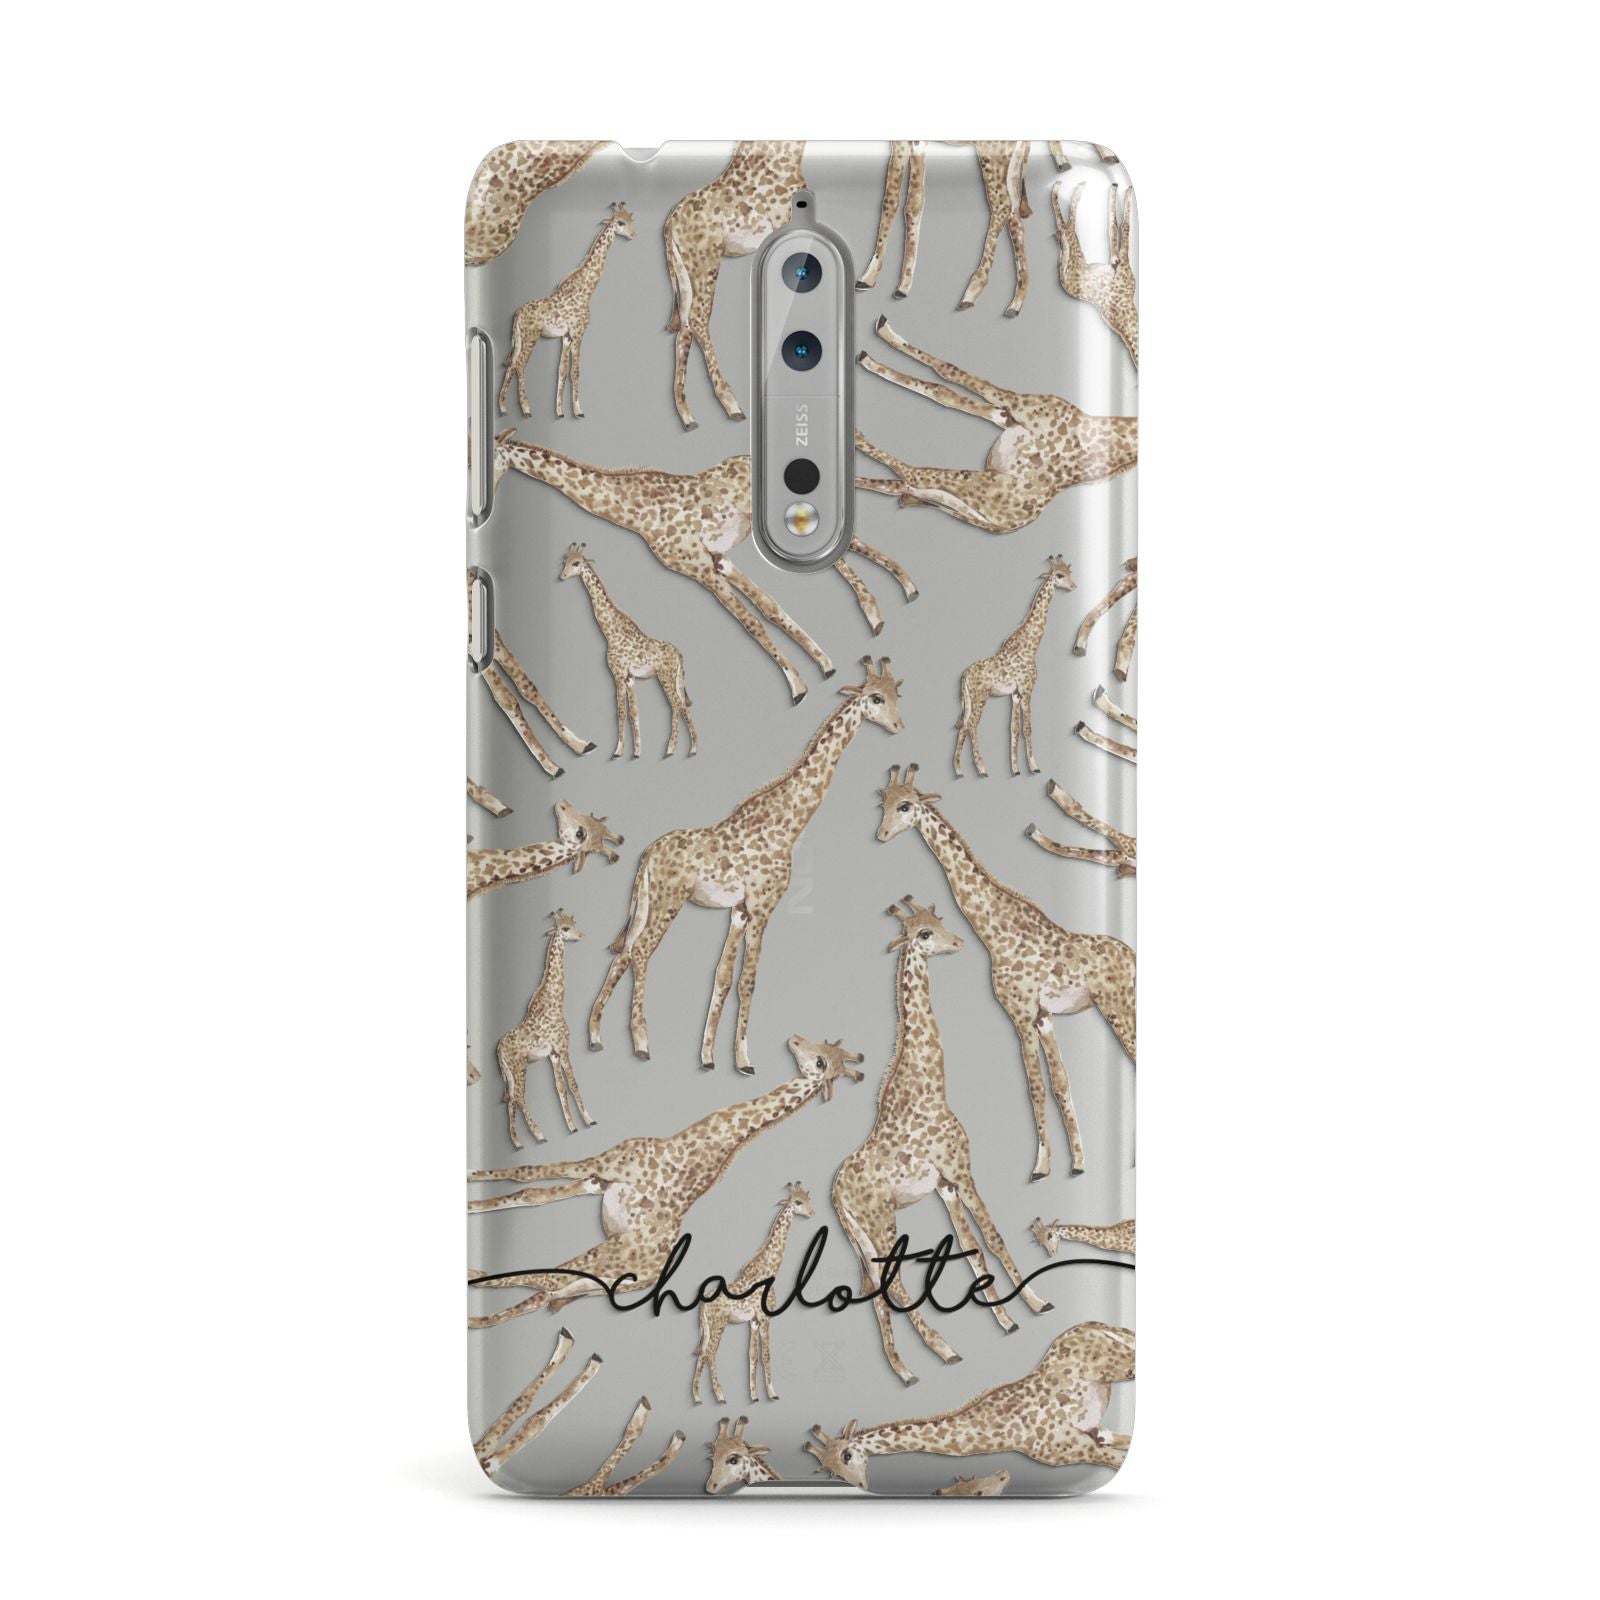 Personalised Giraffes with Name Nokia Case